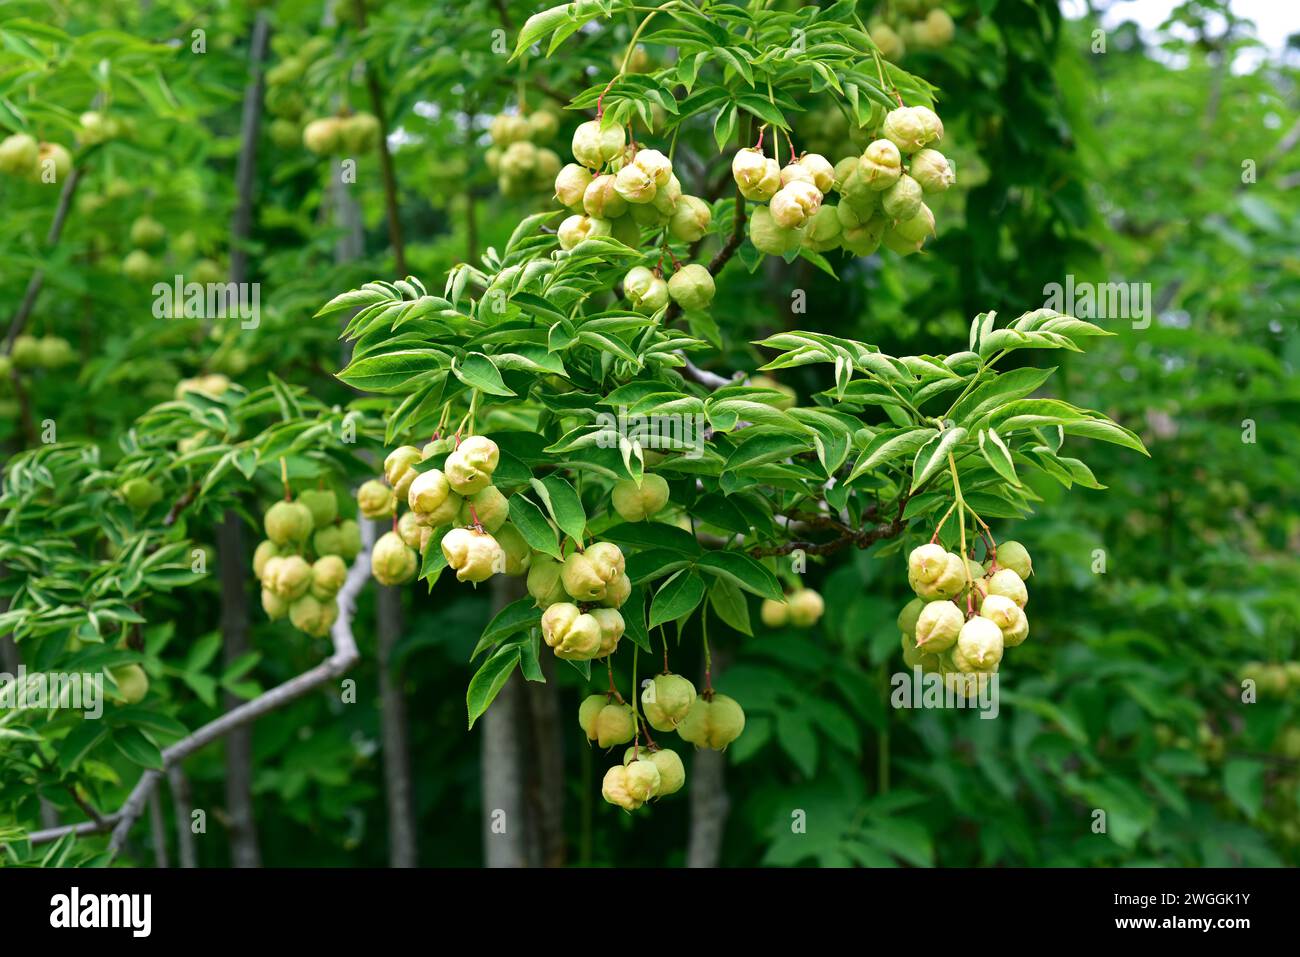 European bladdernut (Staphylea pinnata) is a small tree native to central Europe. Its seeds are edible. Stock Photo